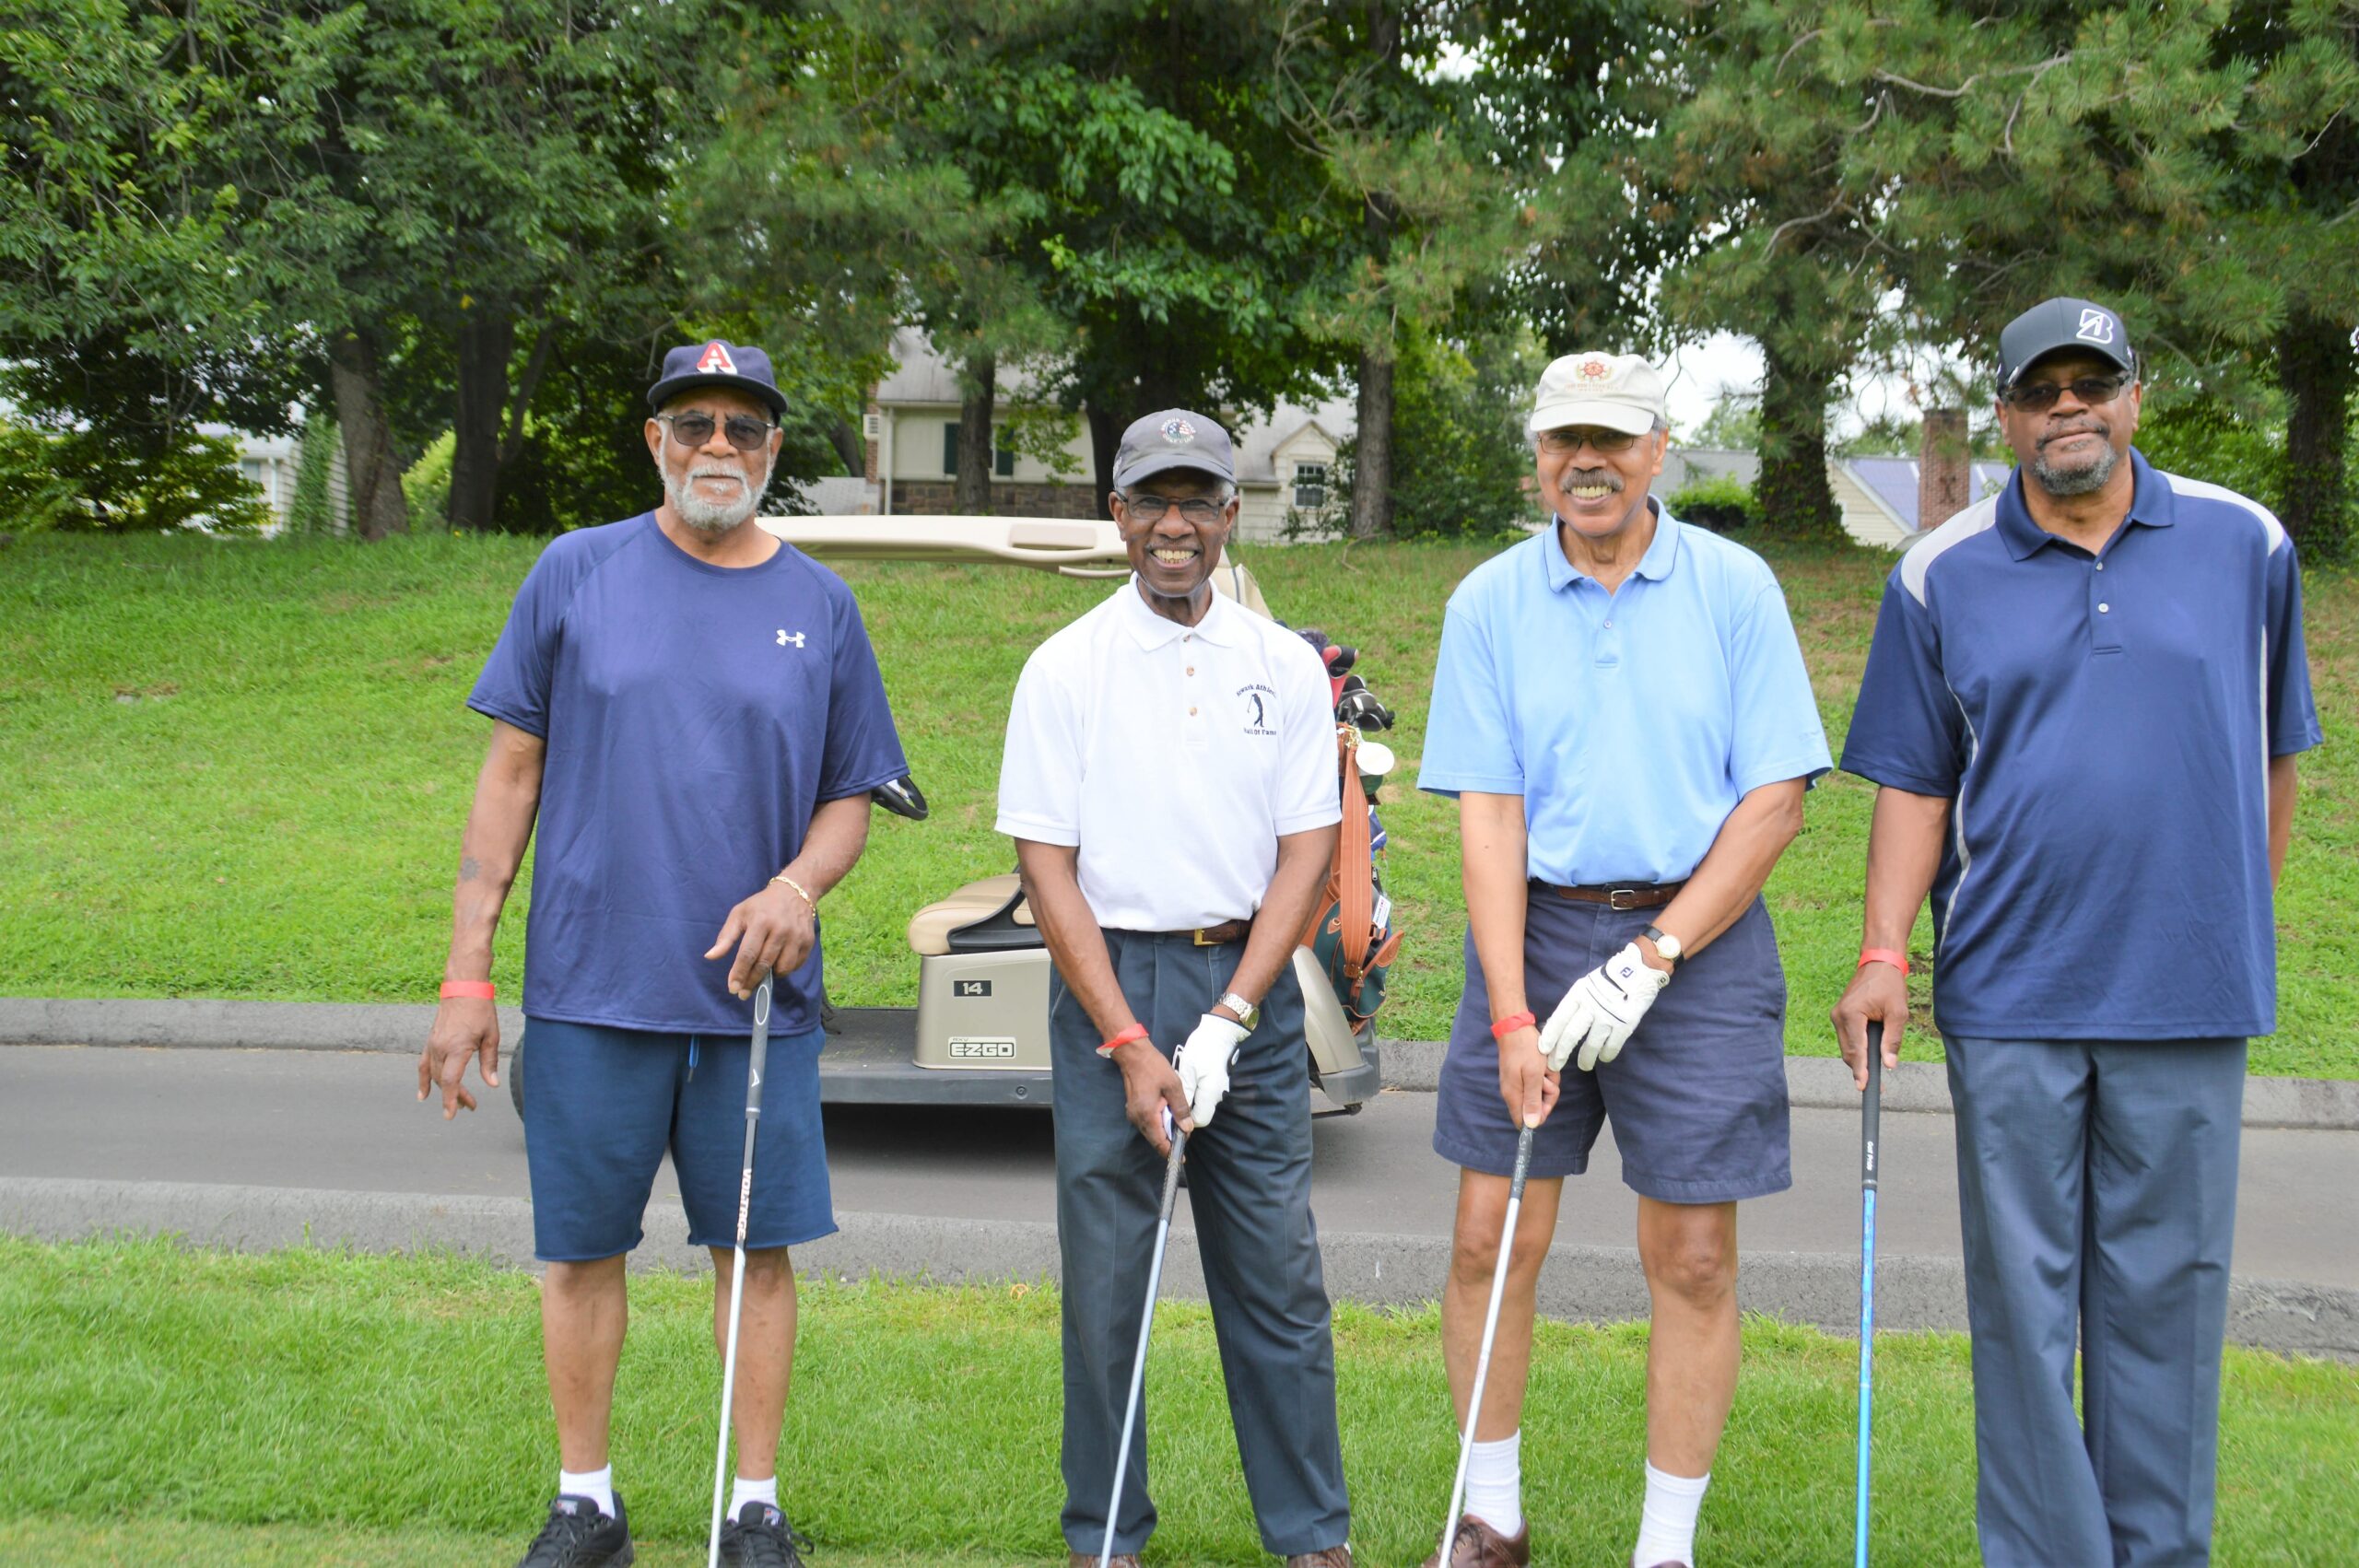 2018 GOLF OUTING – 152